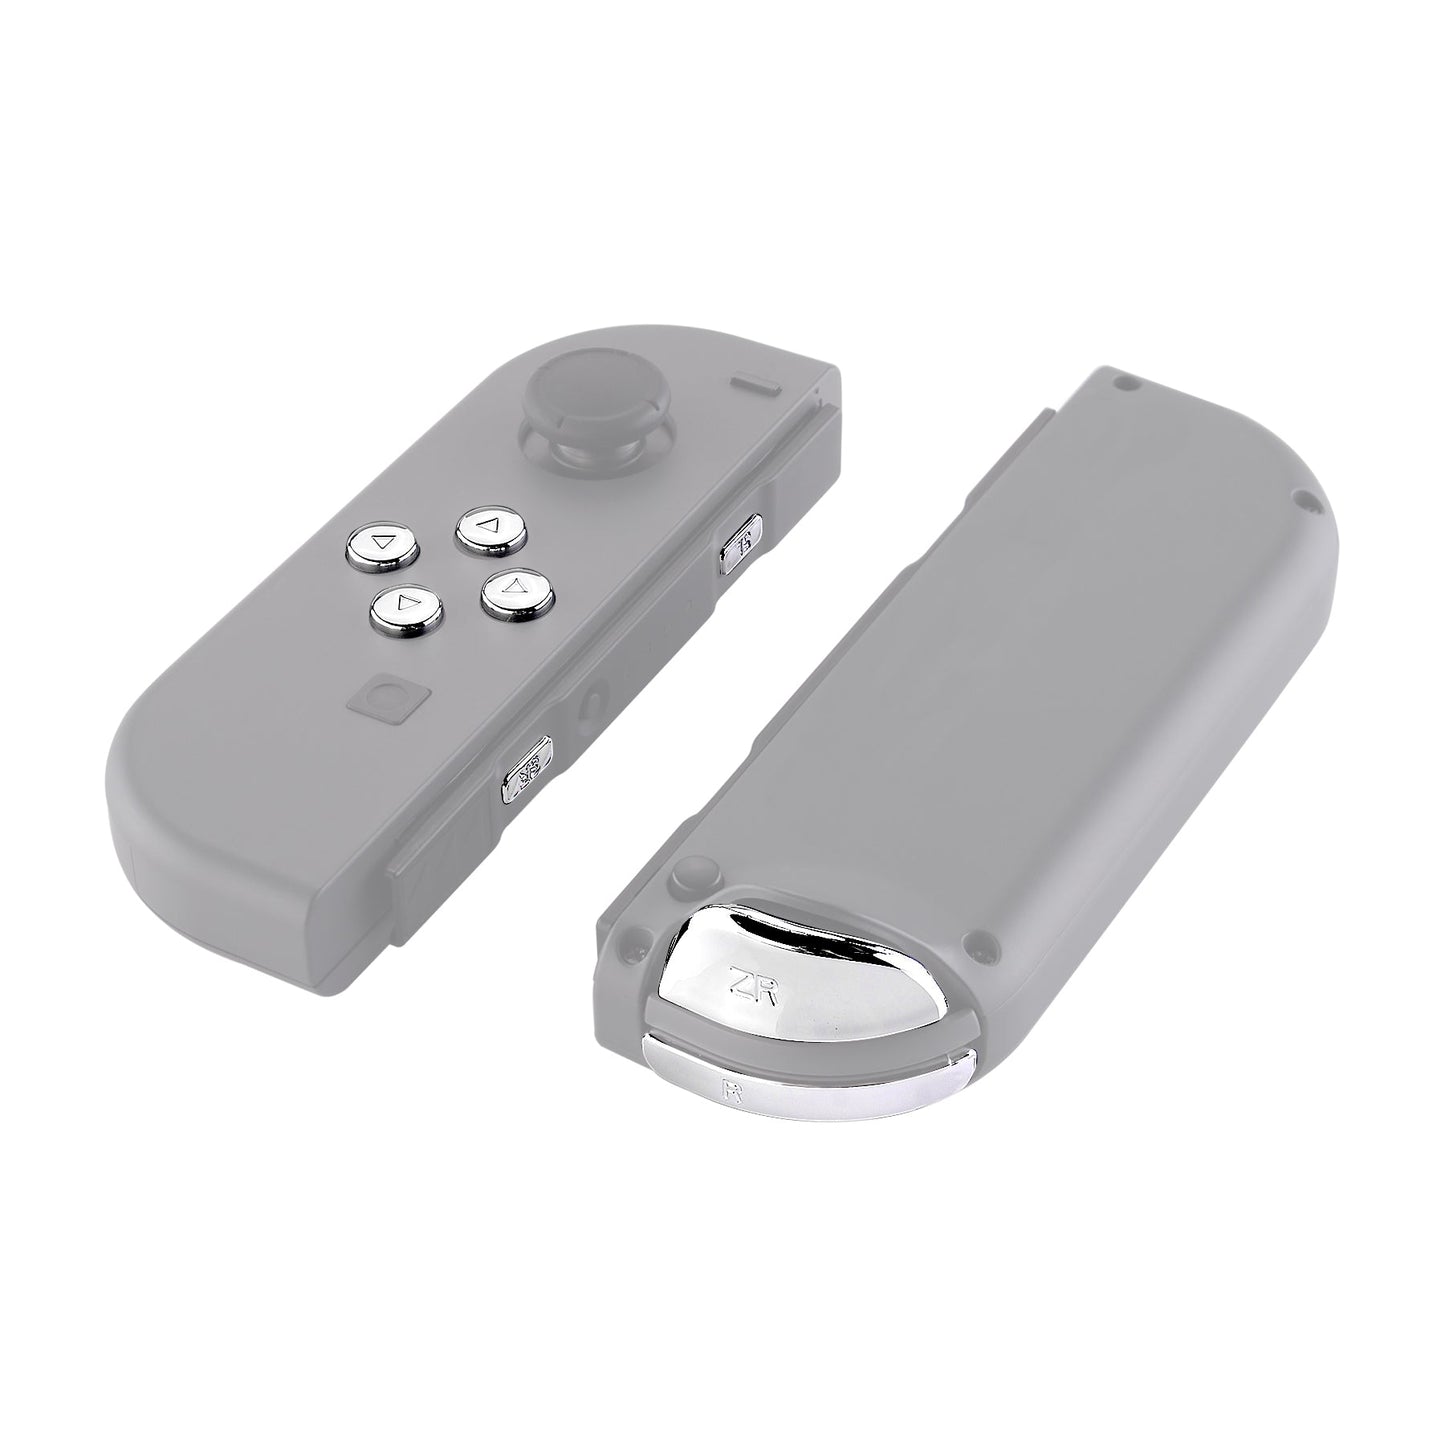 eXtremeRate Retail Chrome Silver Glossy Replacement ABXY Direction Keys SR SL L R ZR ZL Trigger Buttons Springs, Full Set Buttons Repair Kits with Tools for NS Switch JoyCon & OLED JoyCon - JoyCon Shell NOT Included - AJ302